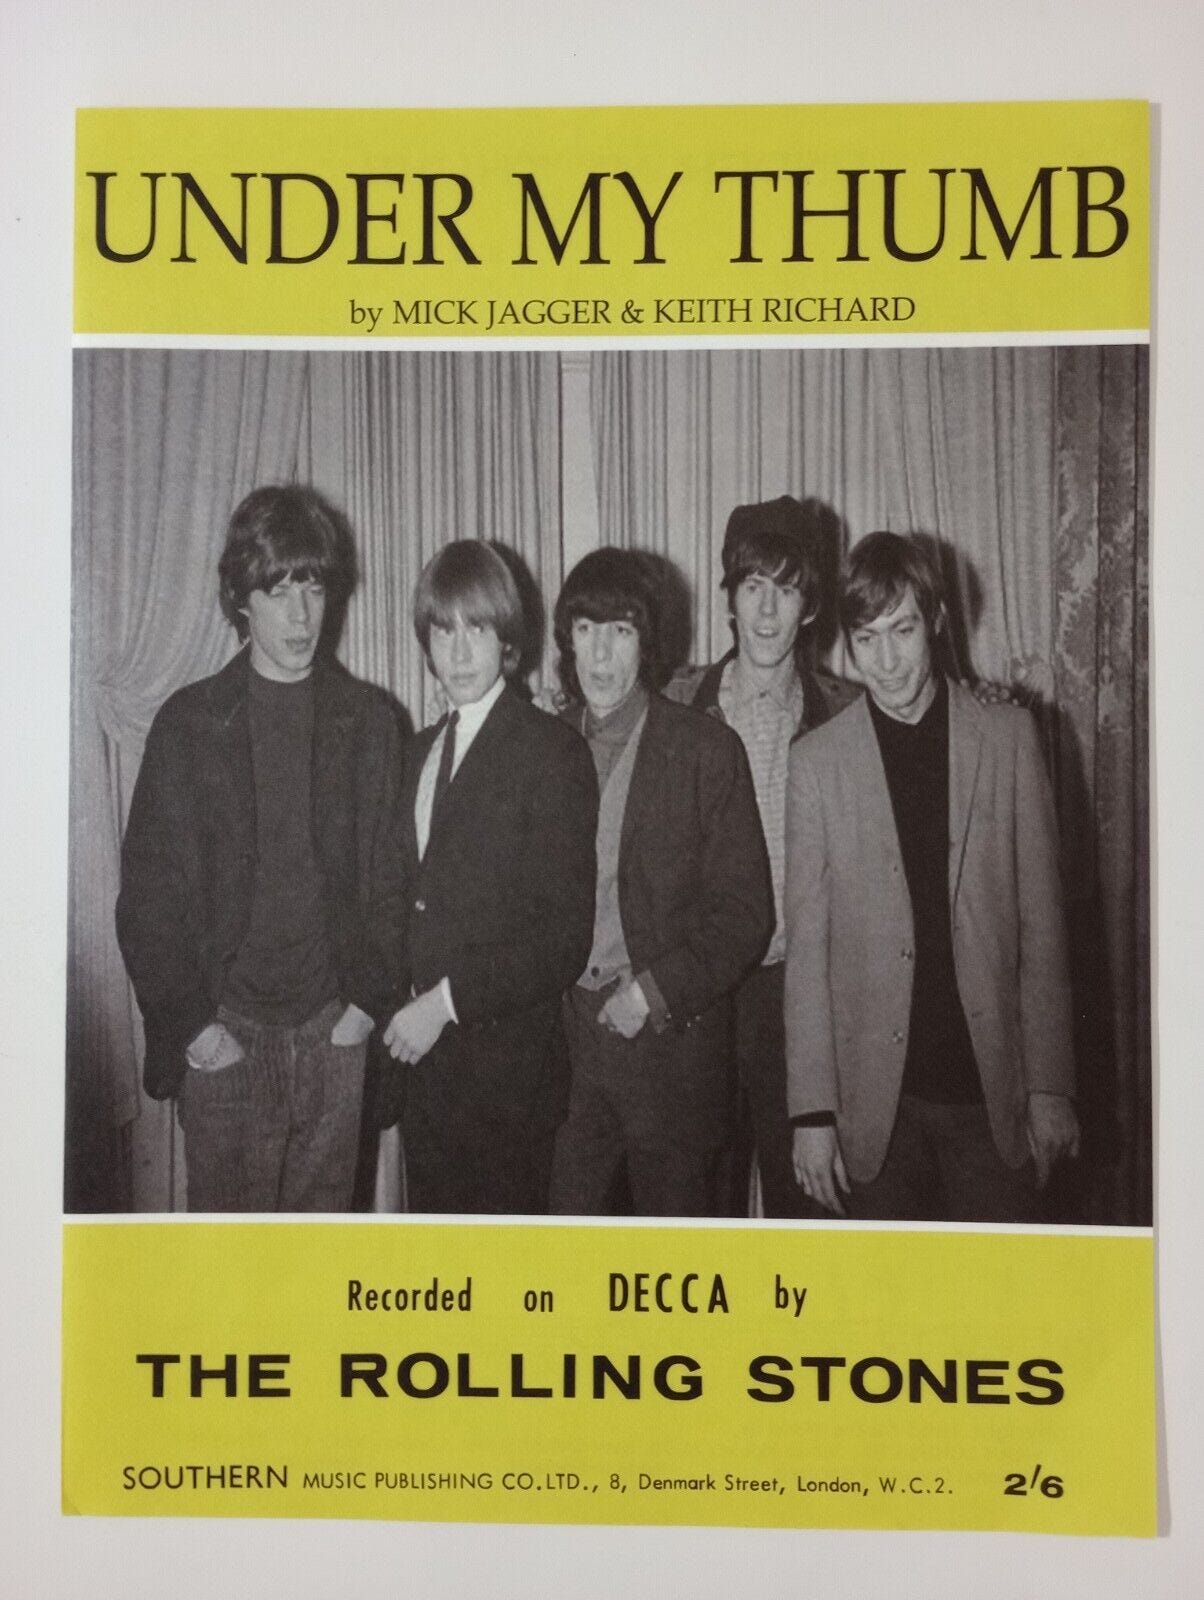 Rolling Stones - Under My Thumb - Sheet Music - Song Book - Reproduction  Copy